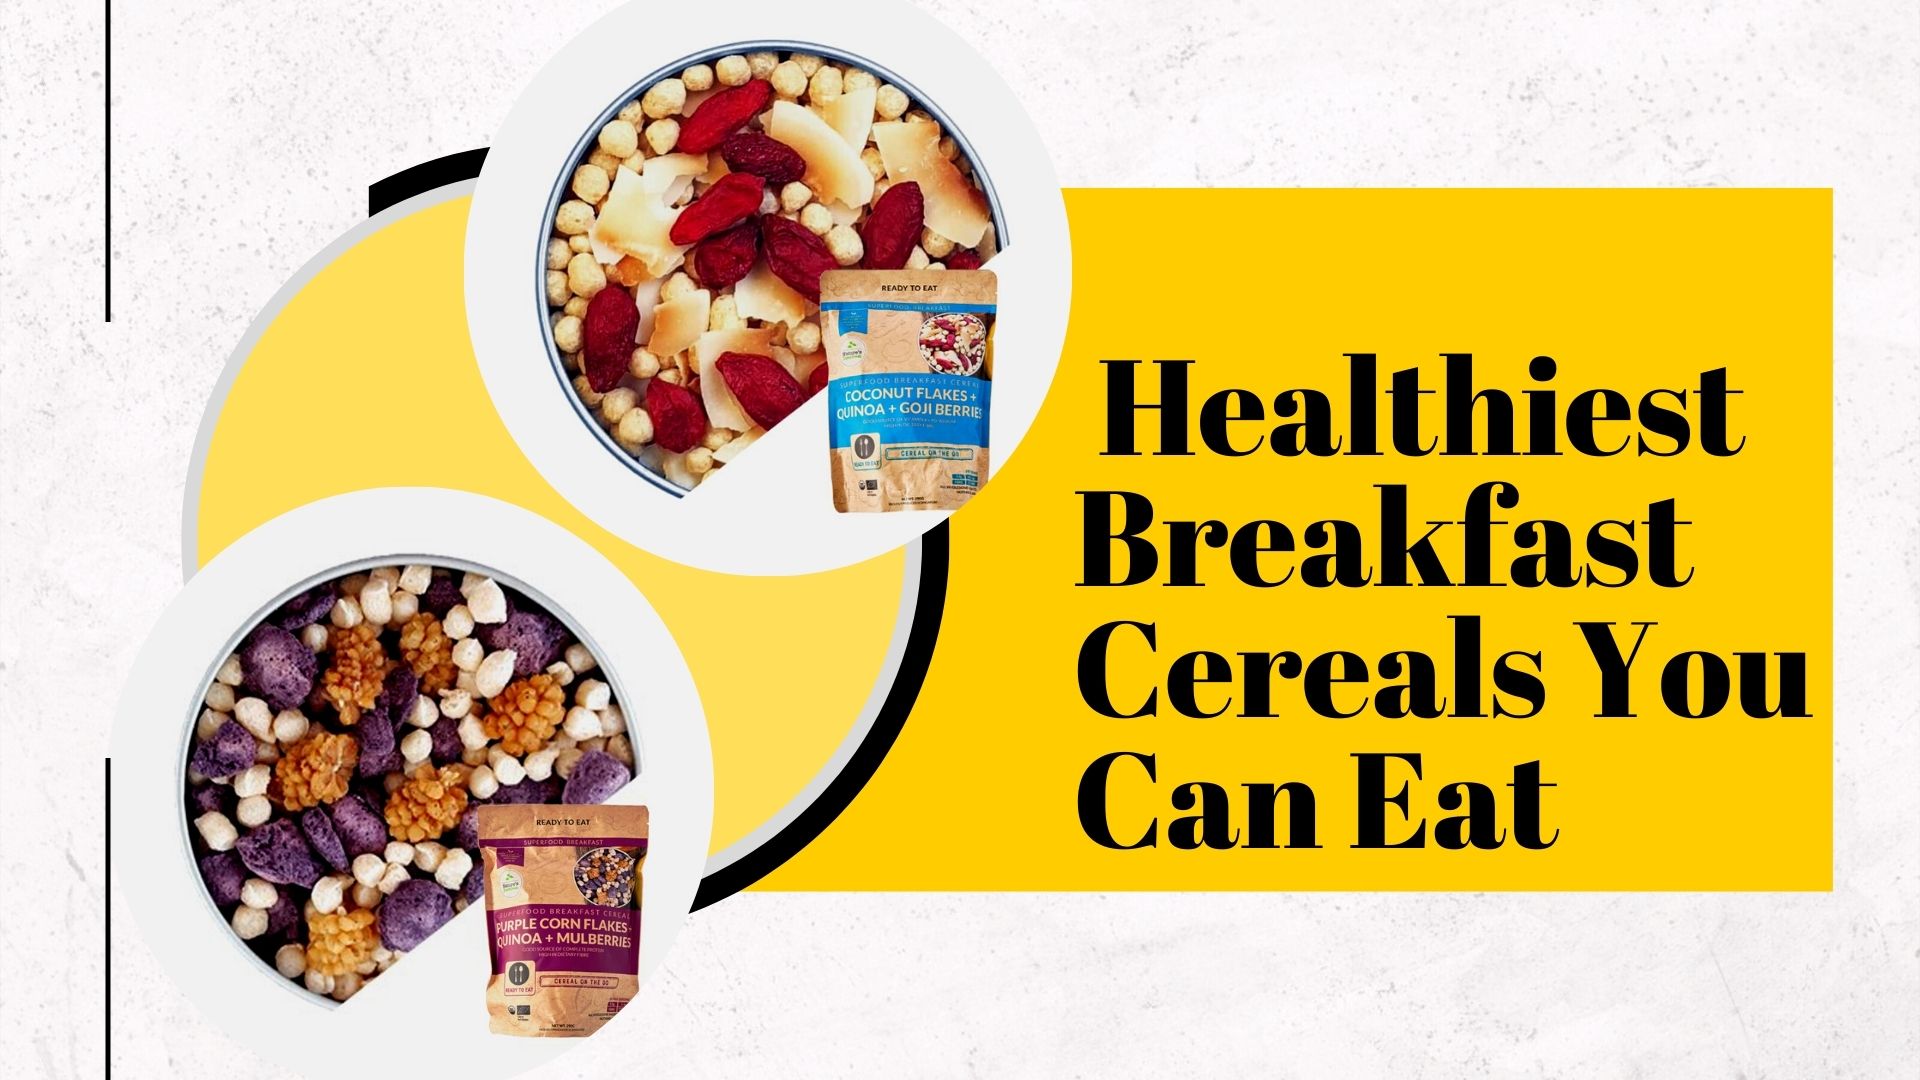 What Are The Healthiest Breakfast Cereals You Can Eat